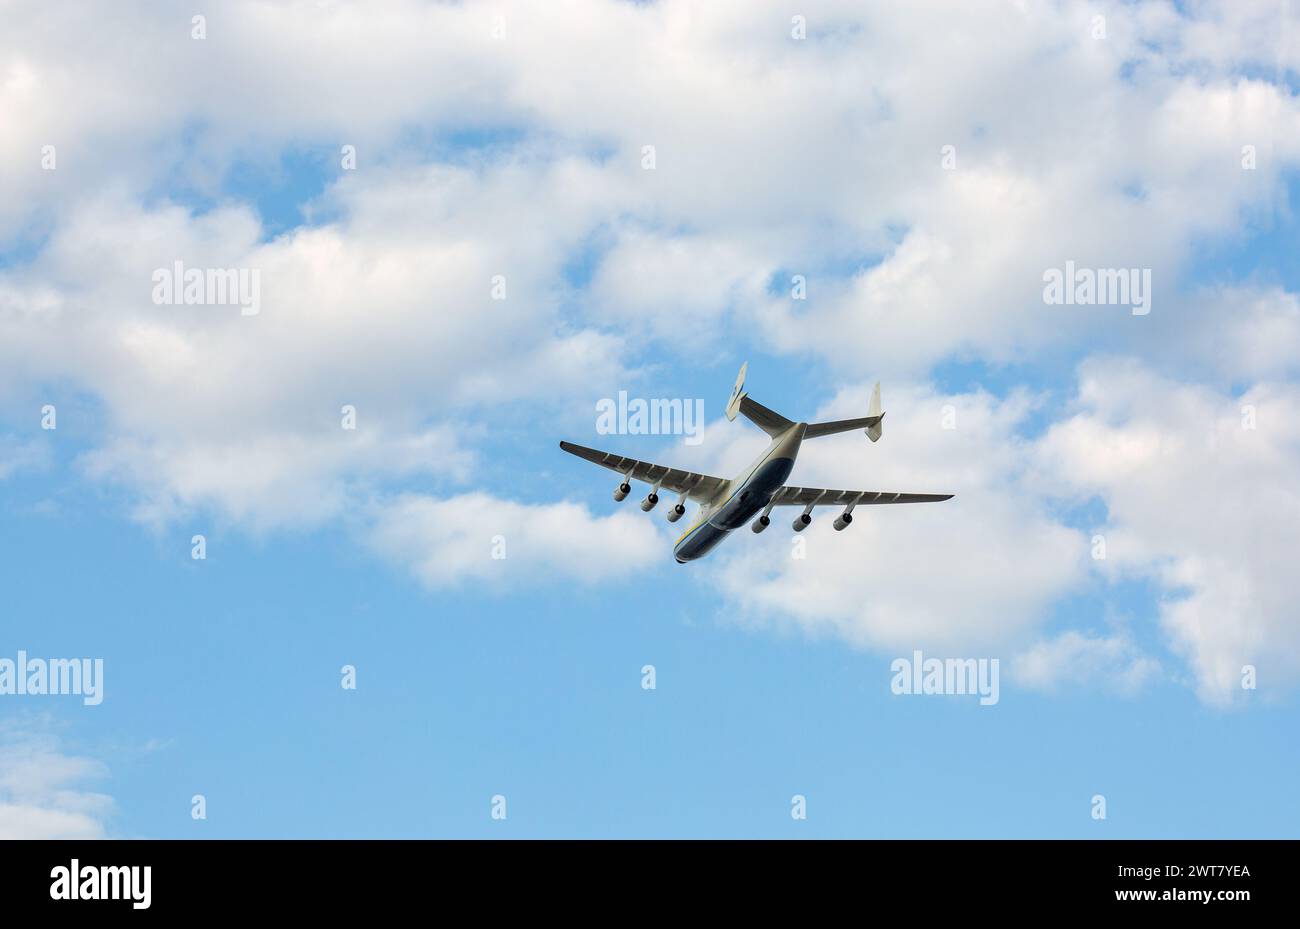 Kyiv, Ukraine - August 22., 2021: Airplane Antonov AN-225 Mriya, world's largest transport aircraft. It was destroyed at Hostomel airfield after russi Stock Photo